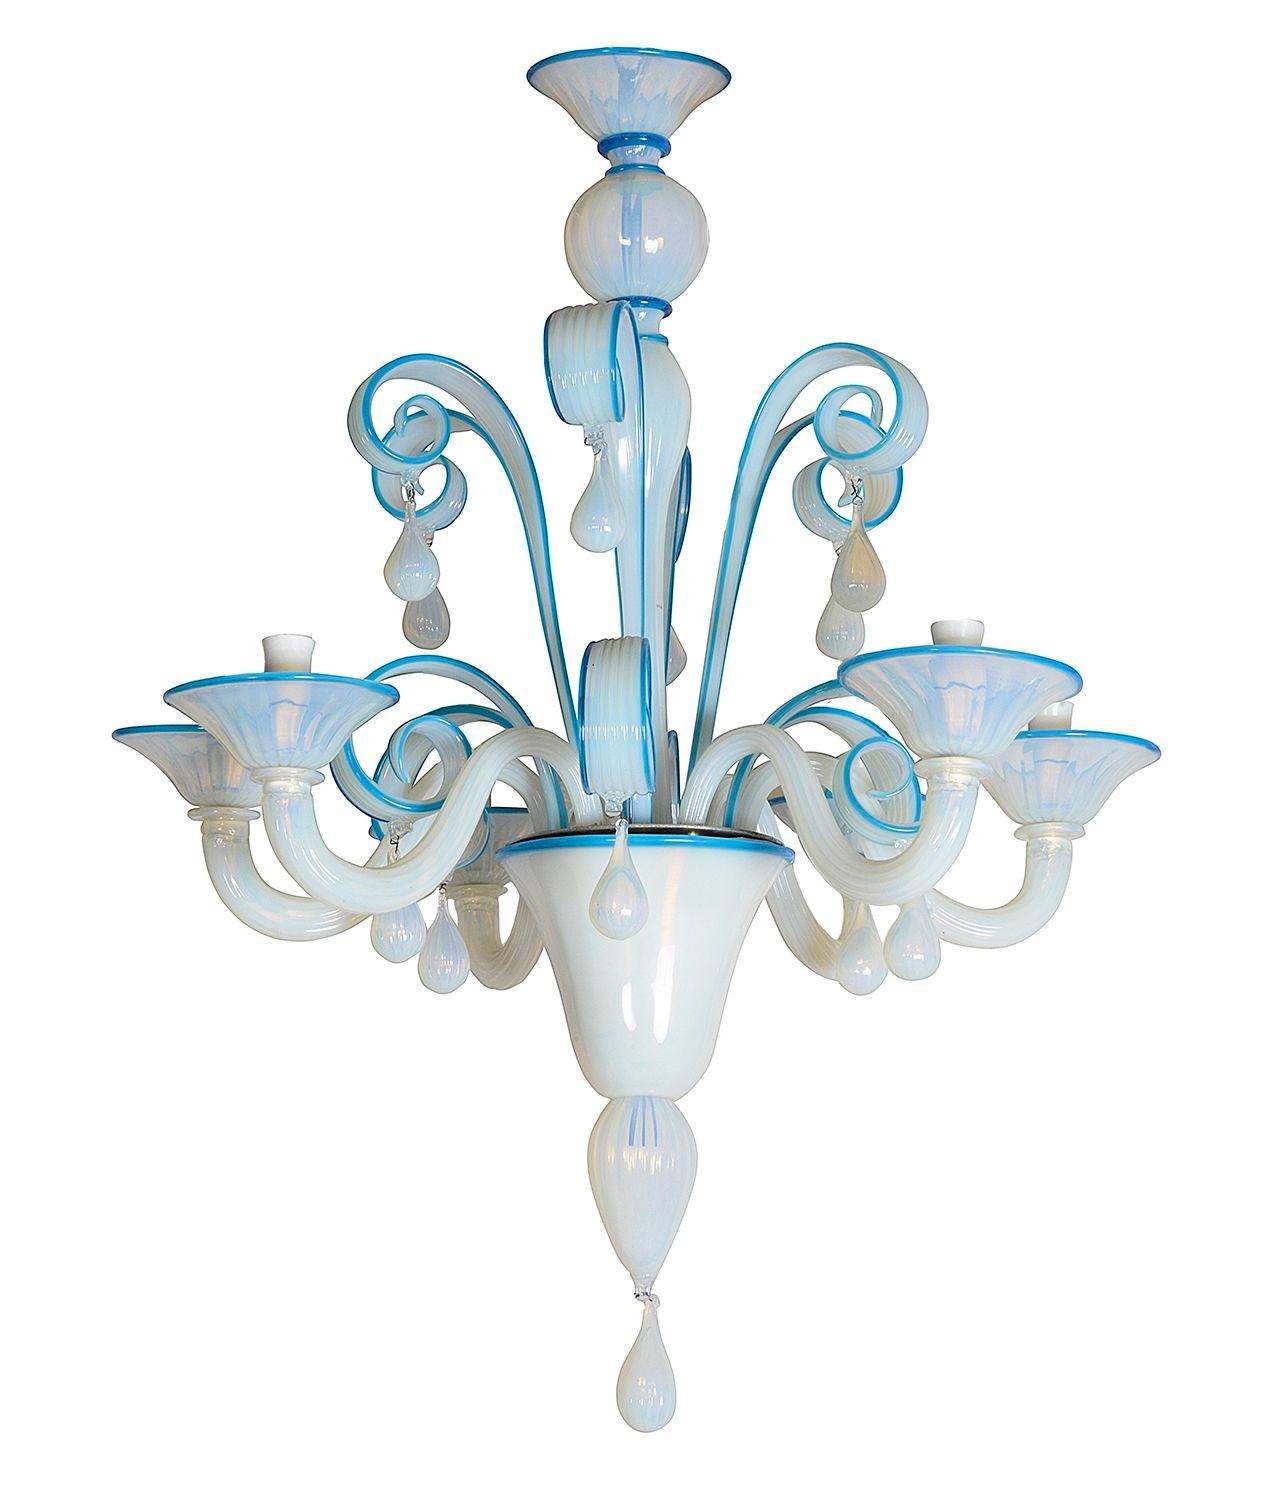 A late 19th Century Venetian Marano glass 8 branch chandelier in this wonderful turquoise and white colouring.

Batch 76 G9560/21 CEYZ